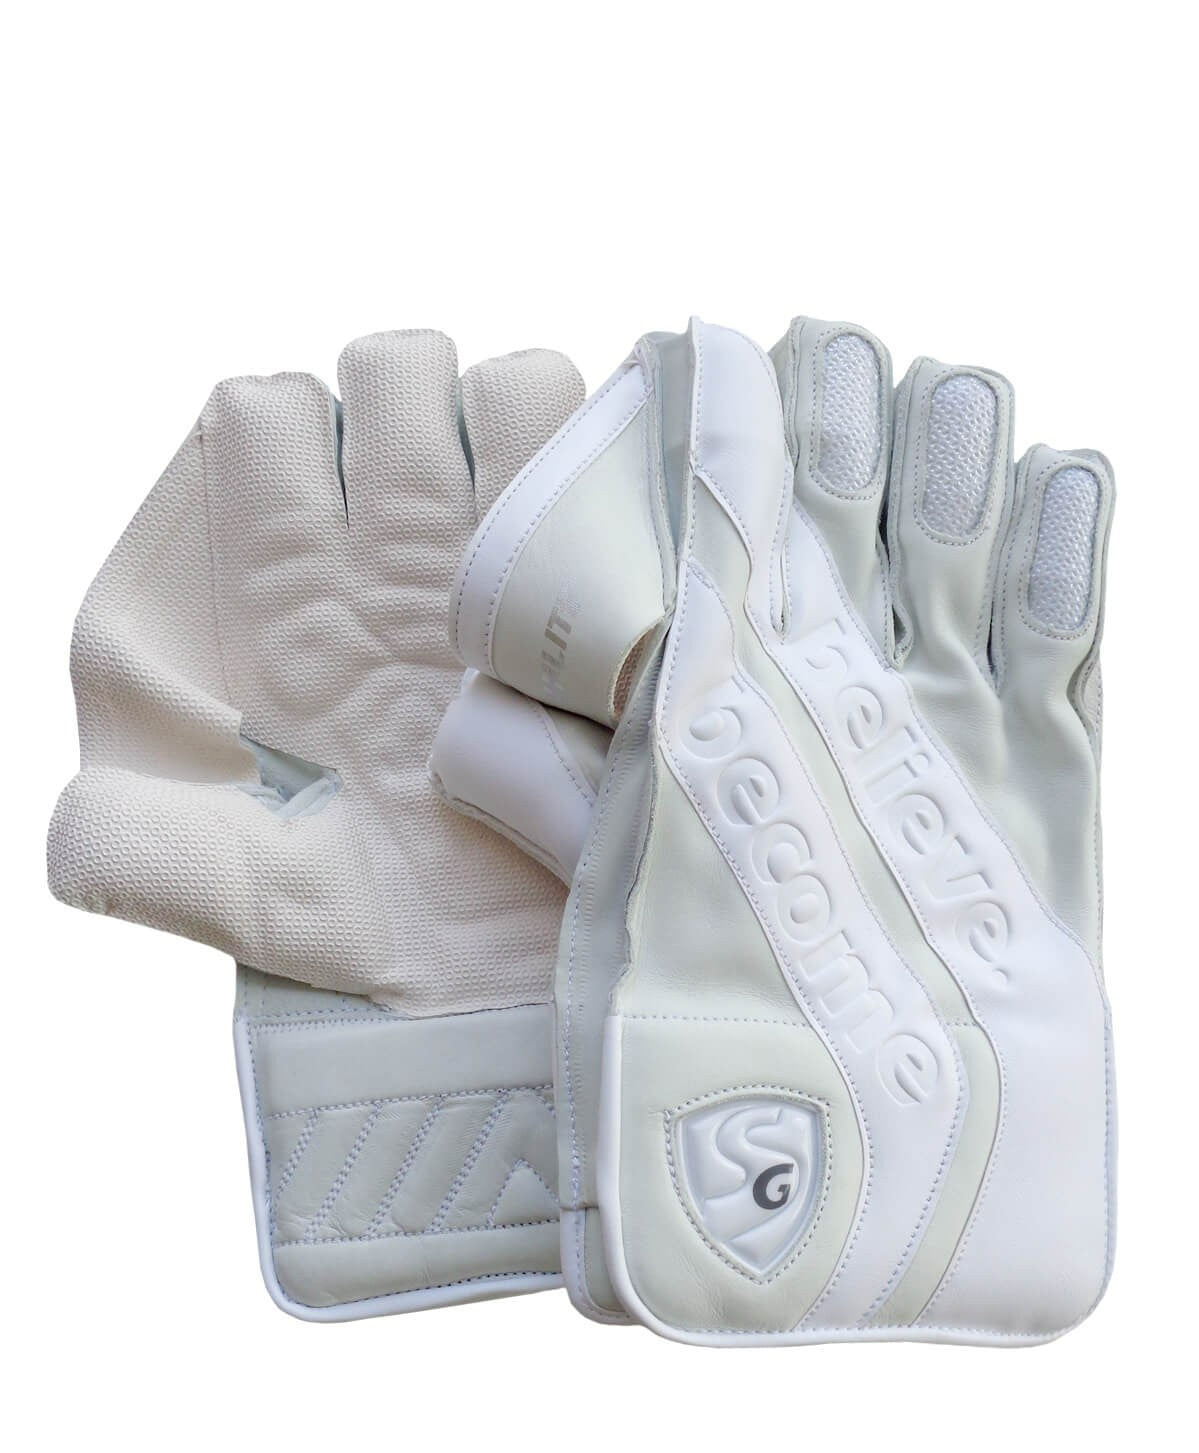 SG HILITE FULL WHITE WICKET KEEPING GLOVES -2023